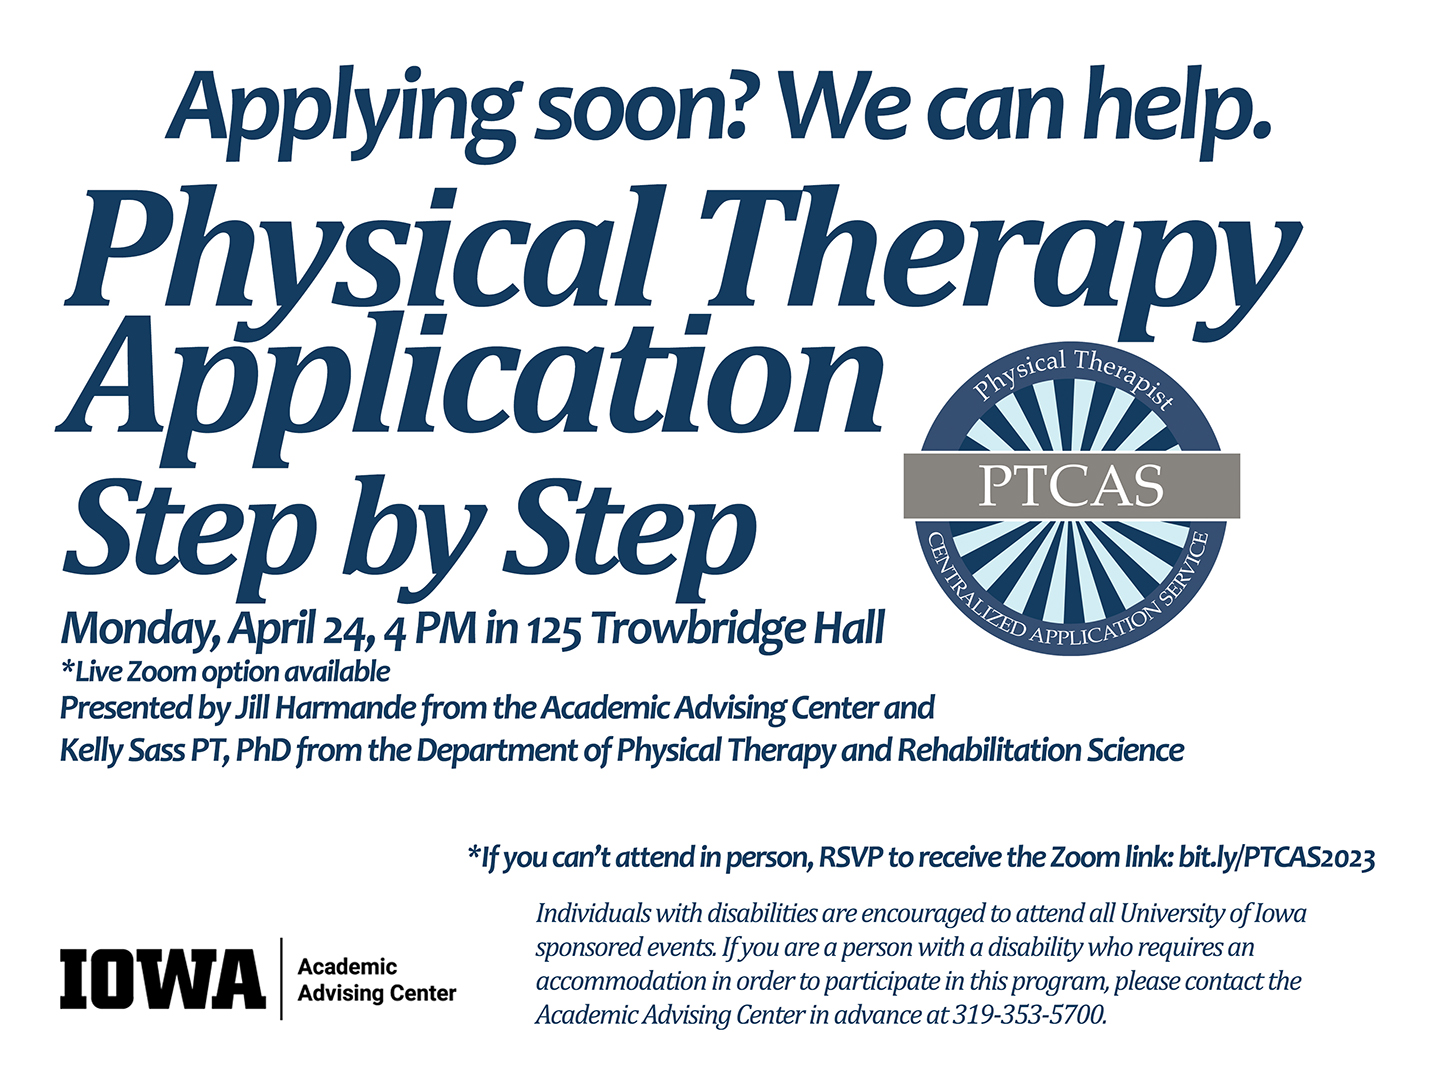 Applying soon? We can help. / Physical Therapy Application / Step by Step / Monday, April 24, 4 PM in 125 Trowbridge Hall / Presented by  Jill Harmande from the Academic Advising Center and Kelly Sass PT, PhD from the Department of Physical Therapy and Re